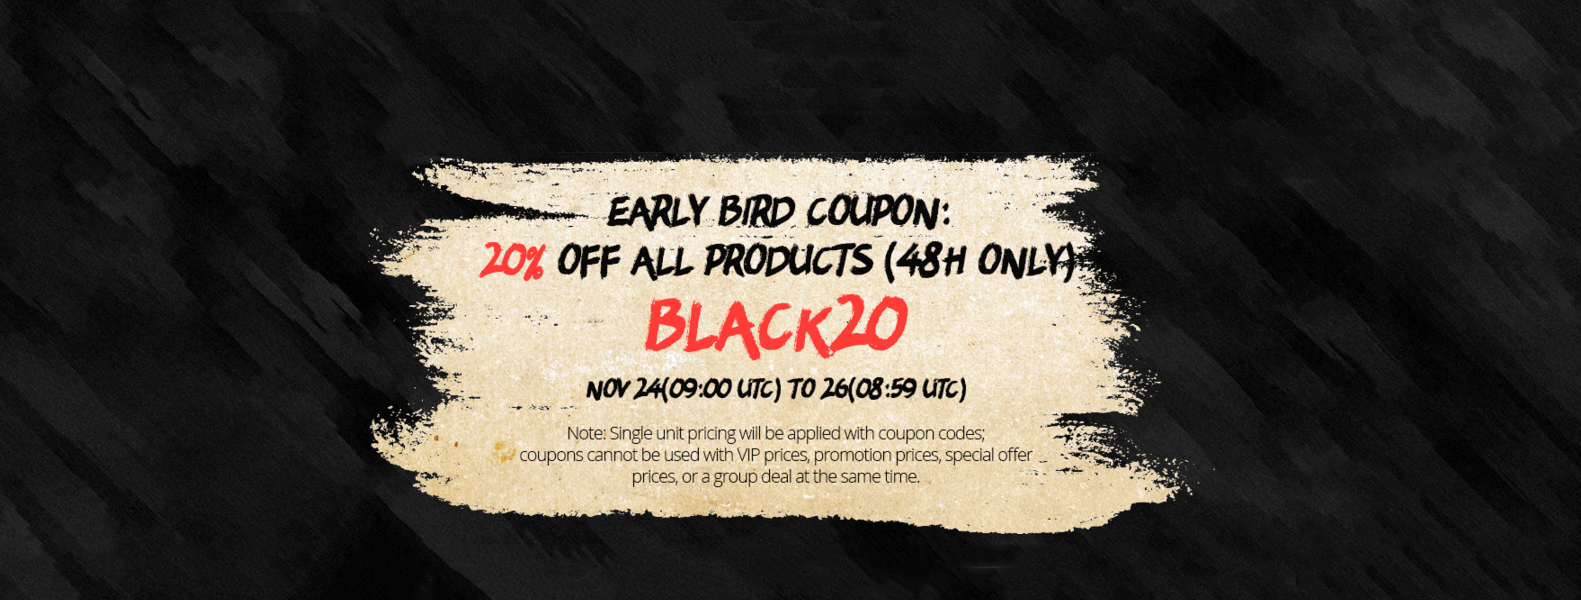 Black Friday Promotion from Everbuying 2